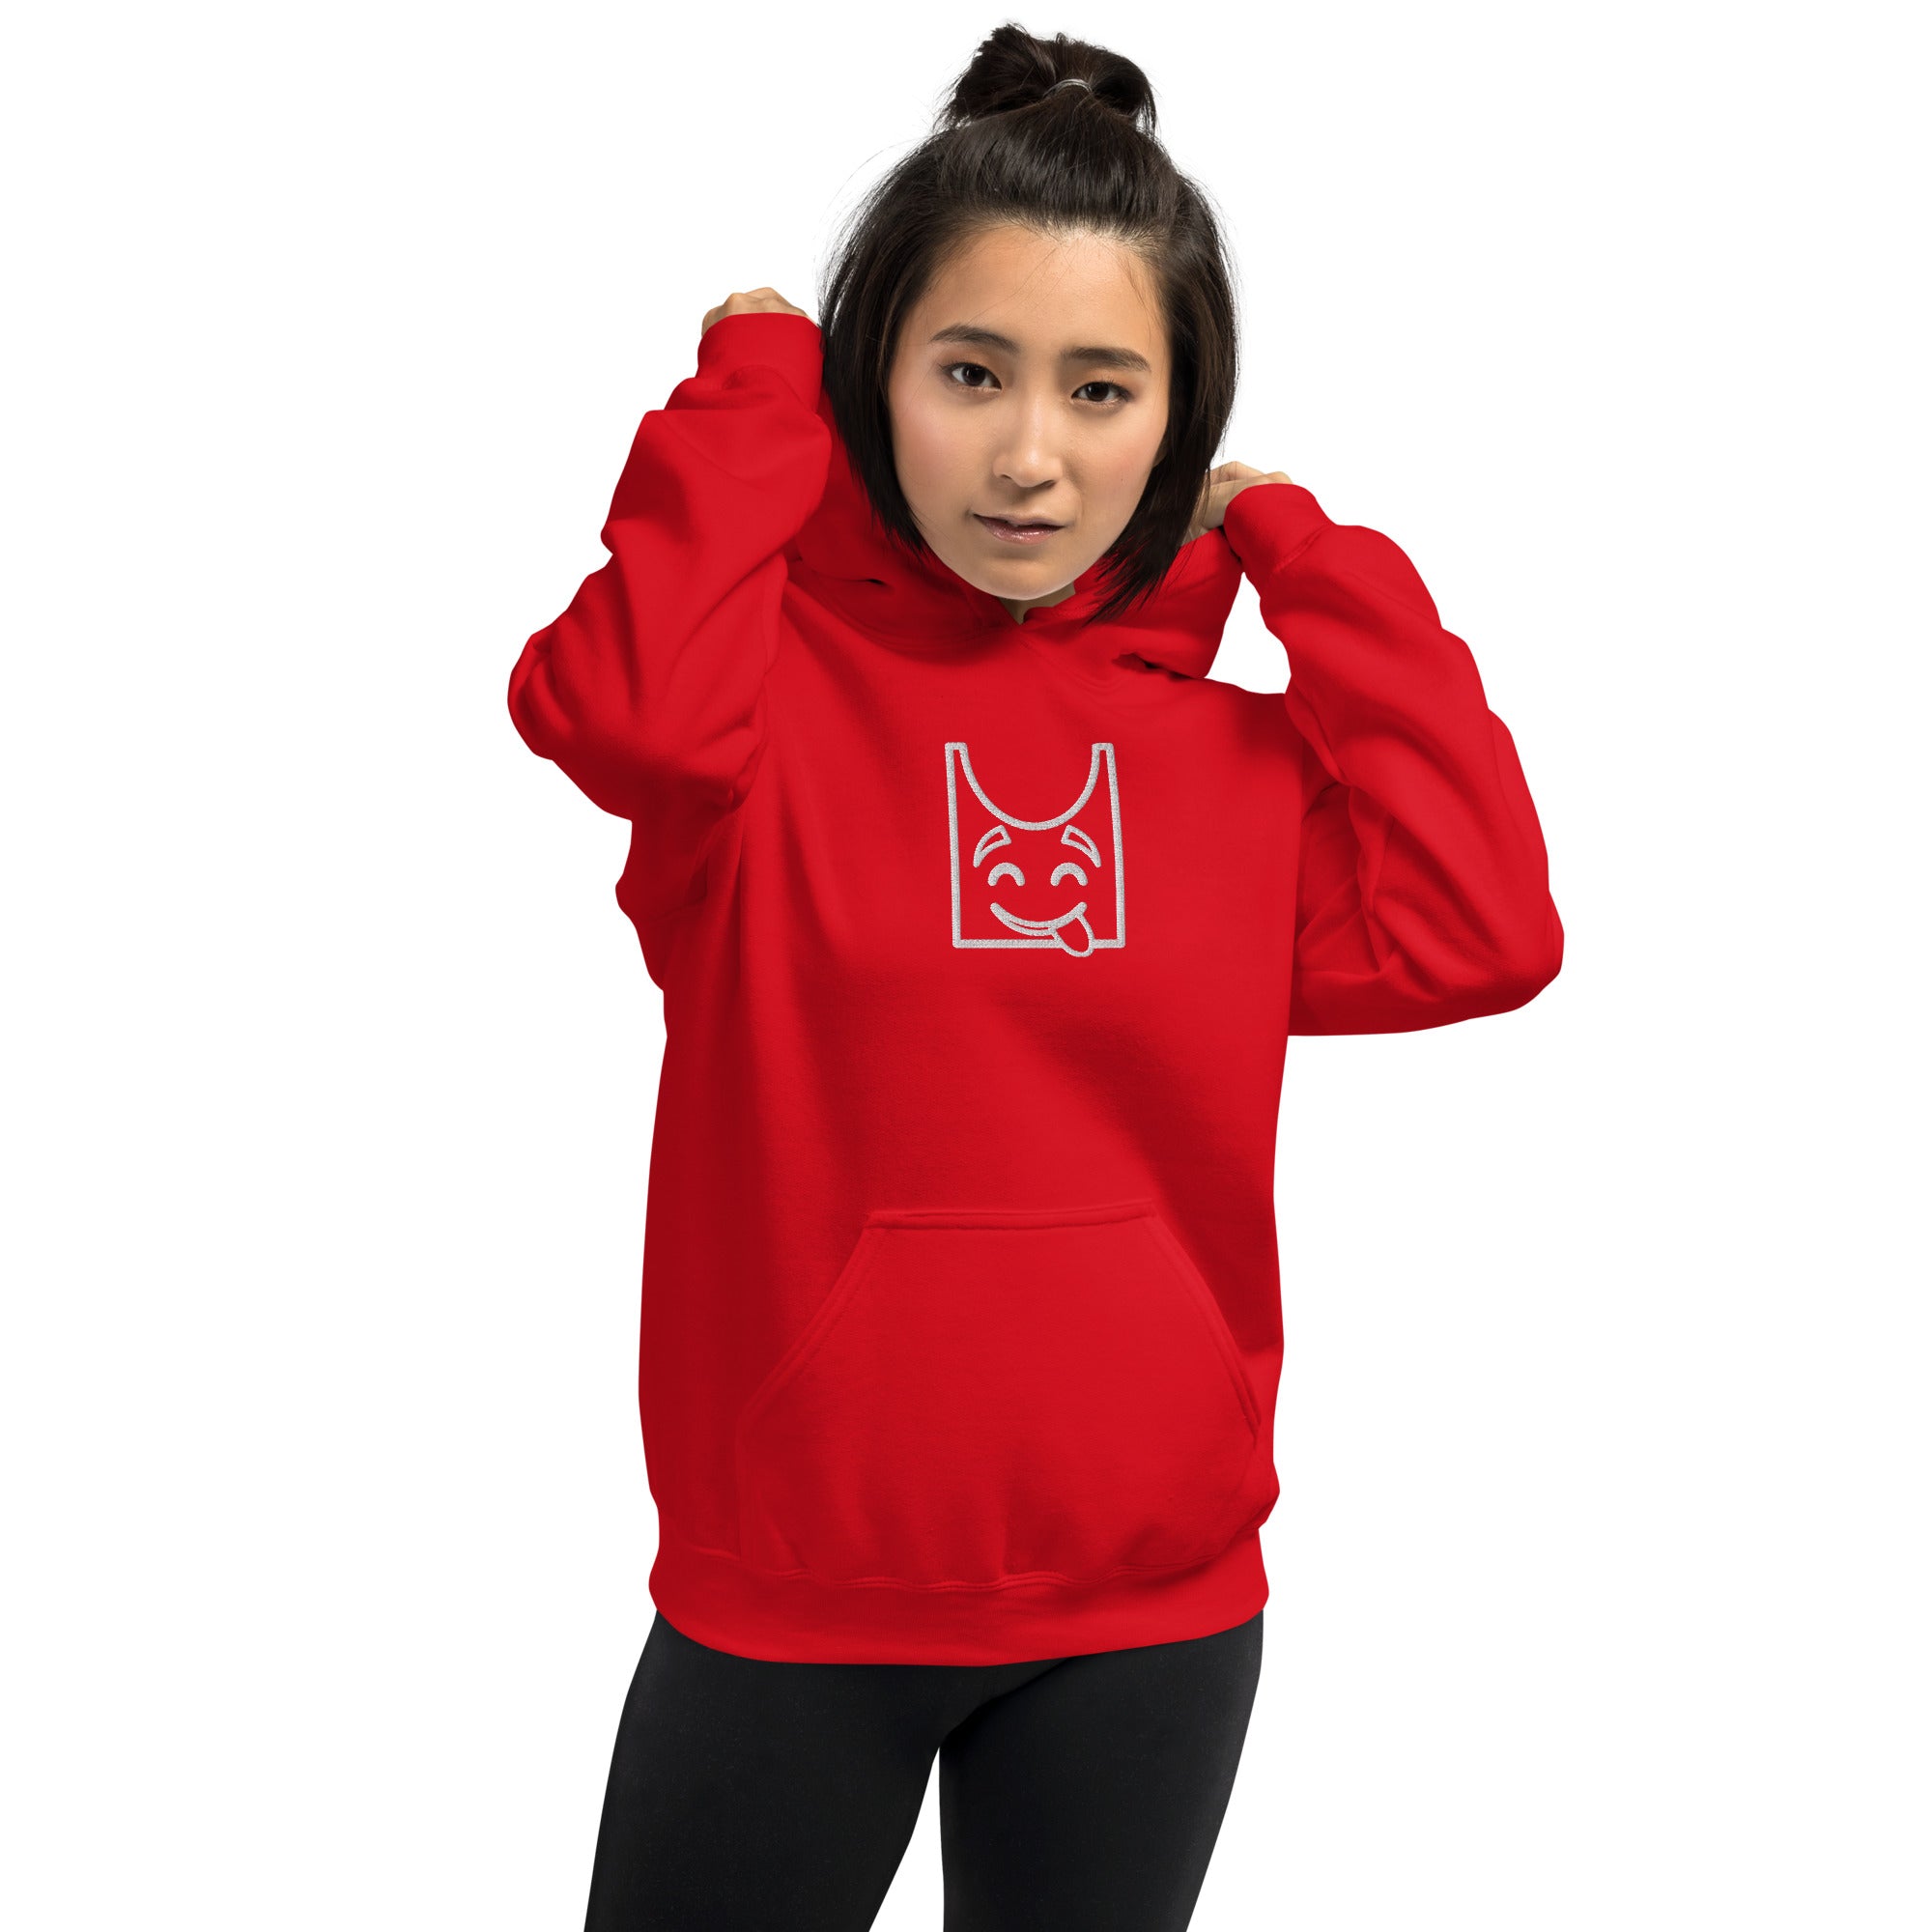 Goofy Kemoji Unisex Hoodies in a variety of colours